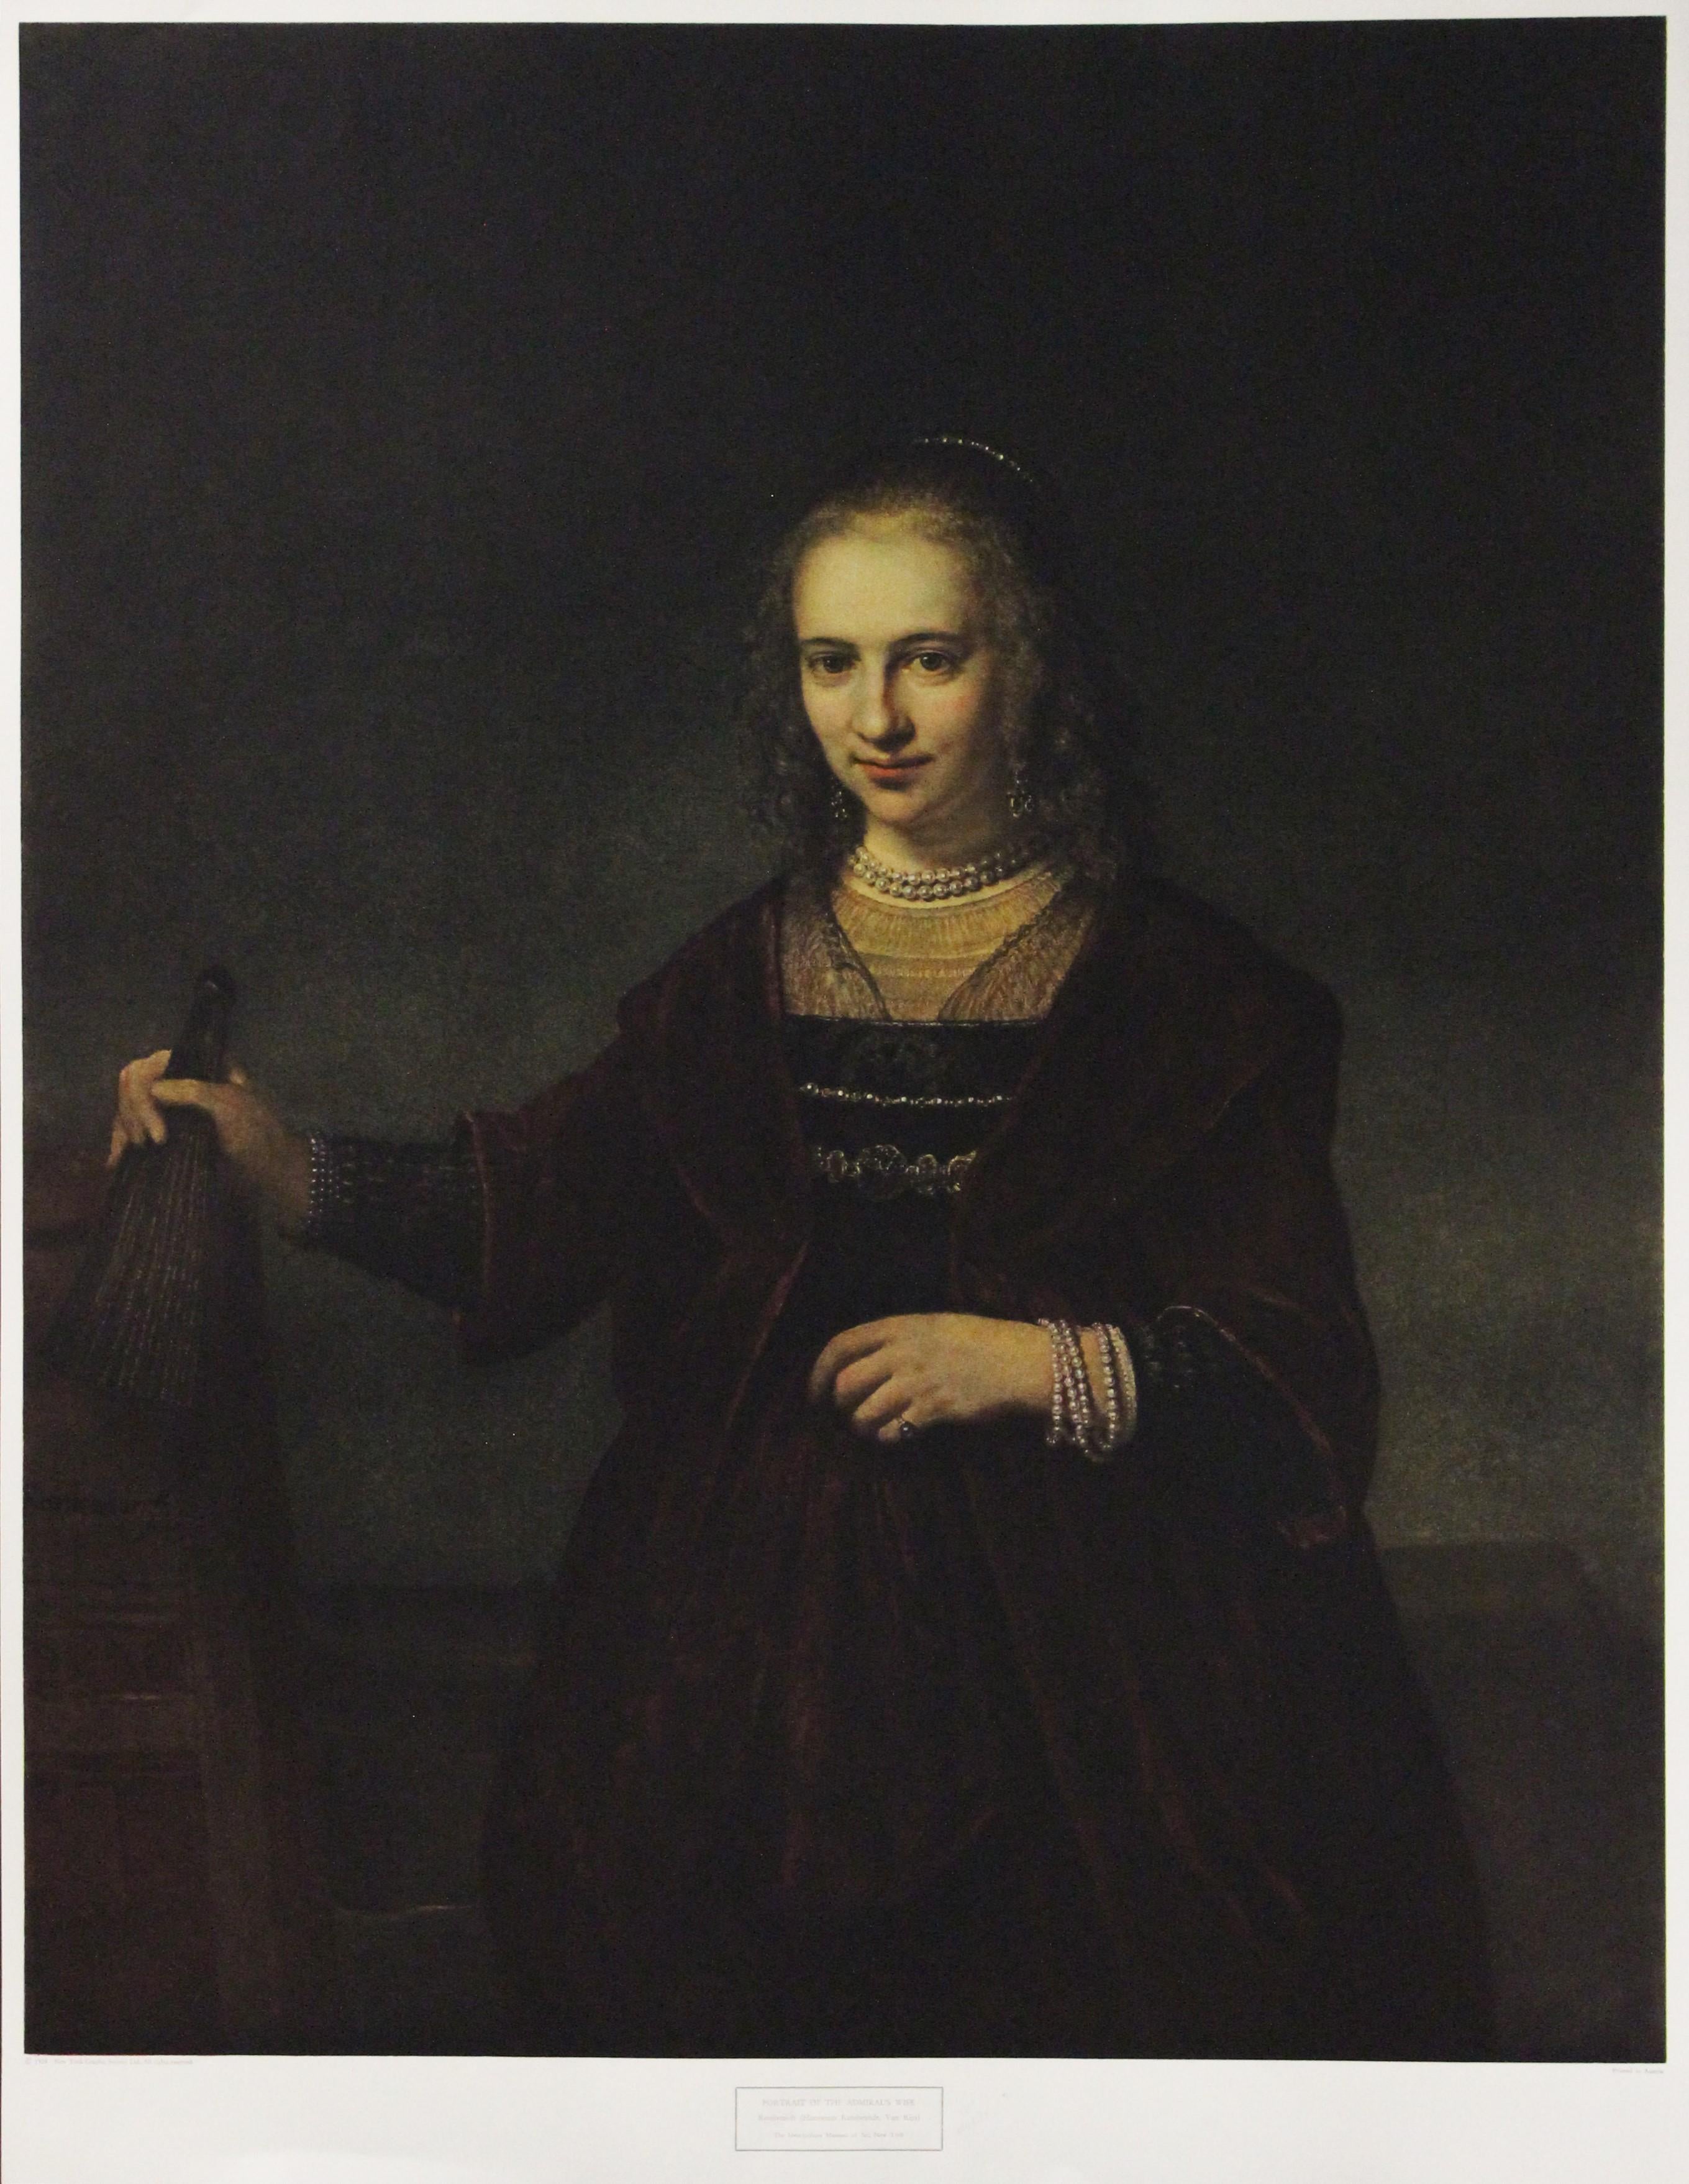 (After) Rembrandt van Rijn  Portrait Print - Portrait Of The Admiral's Wife-Poster. New York Graphic Society. 